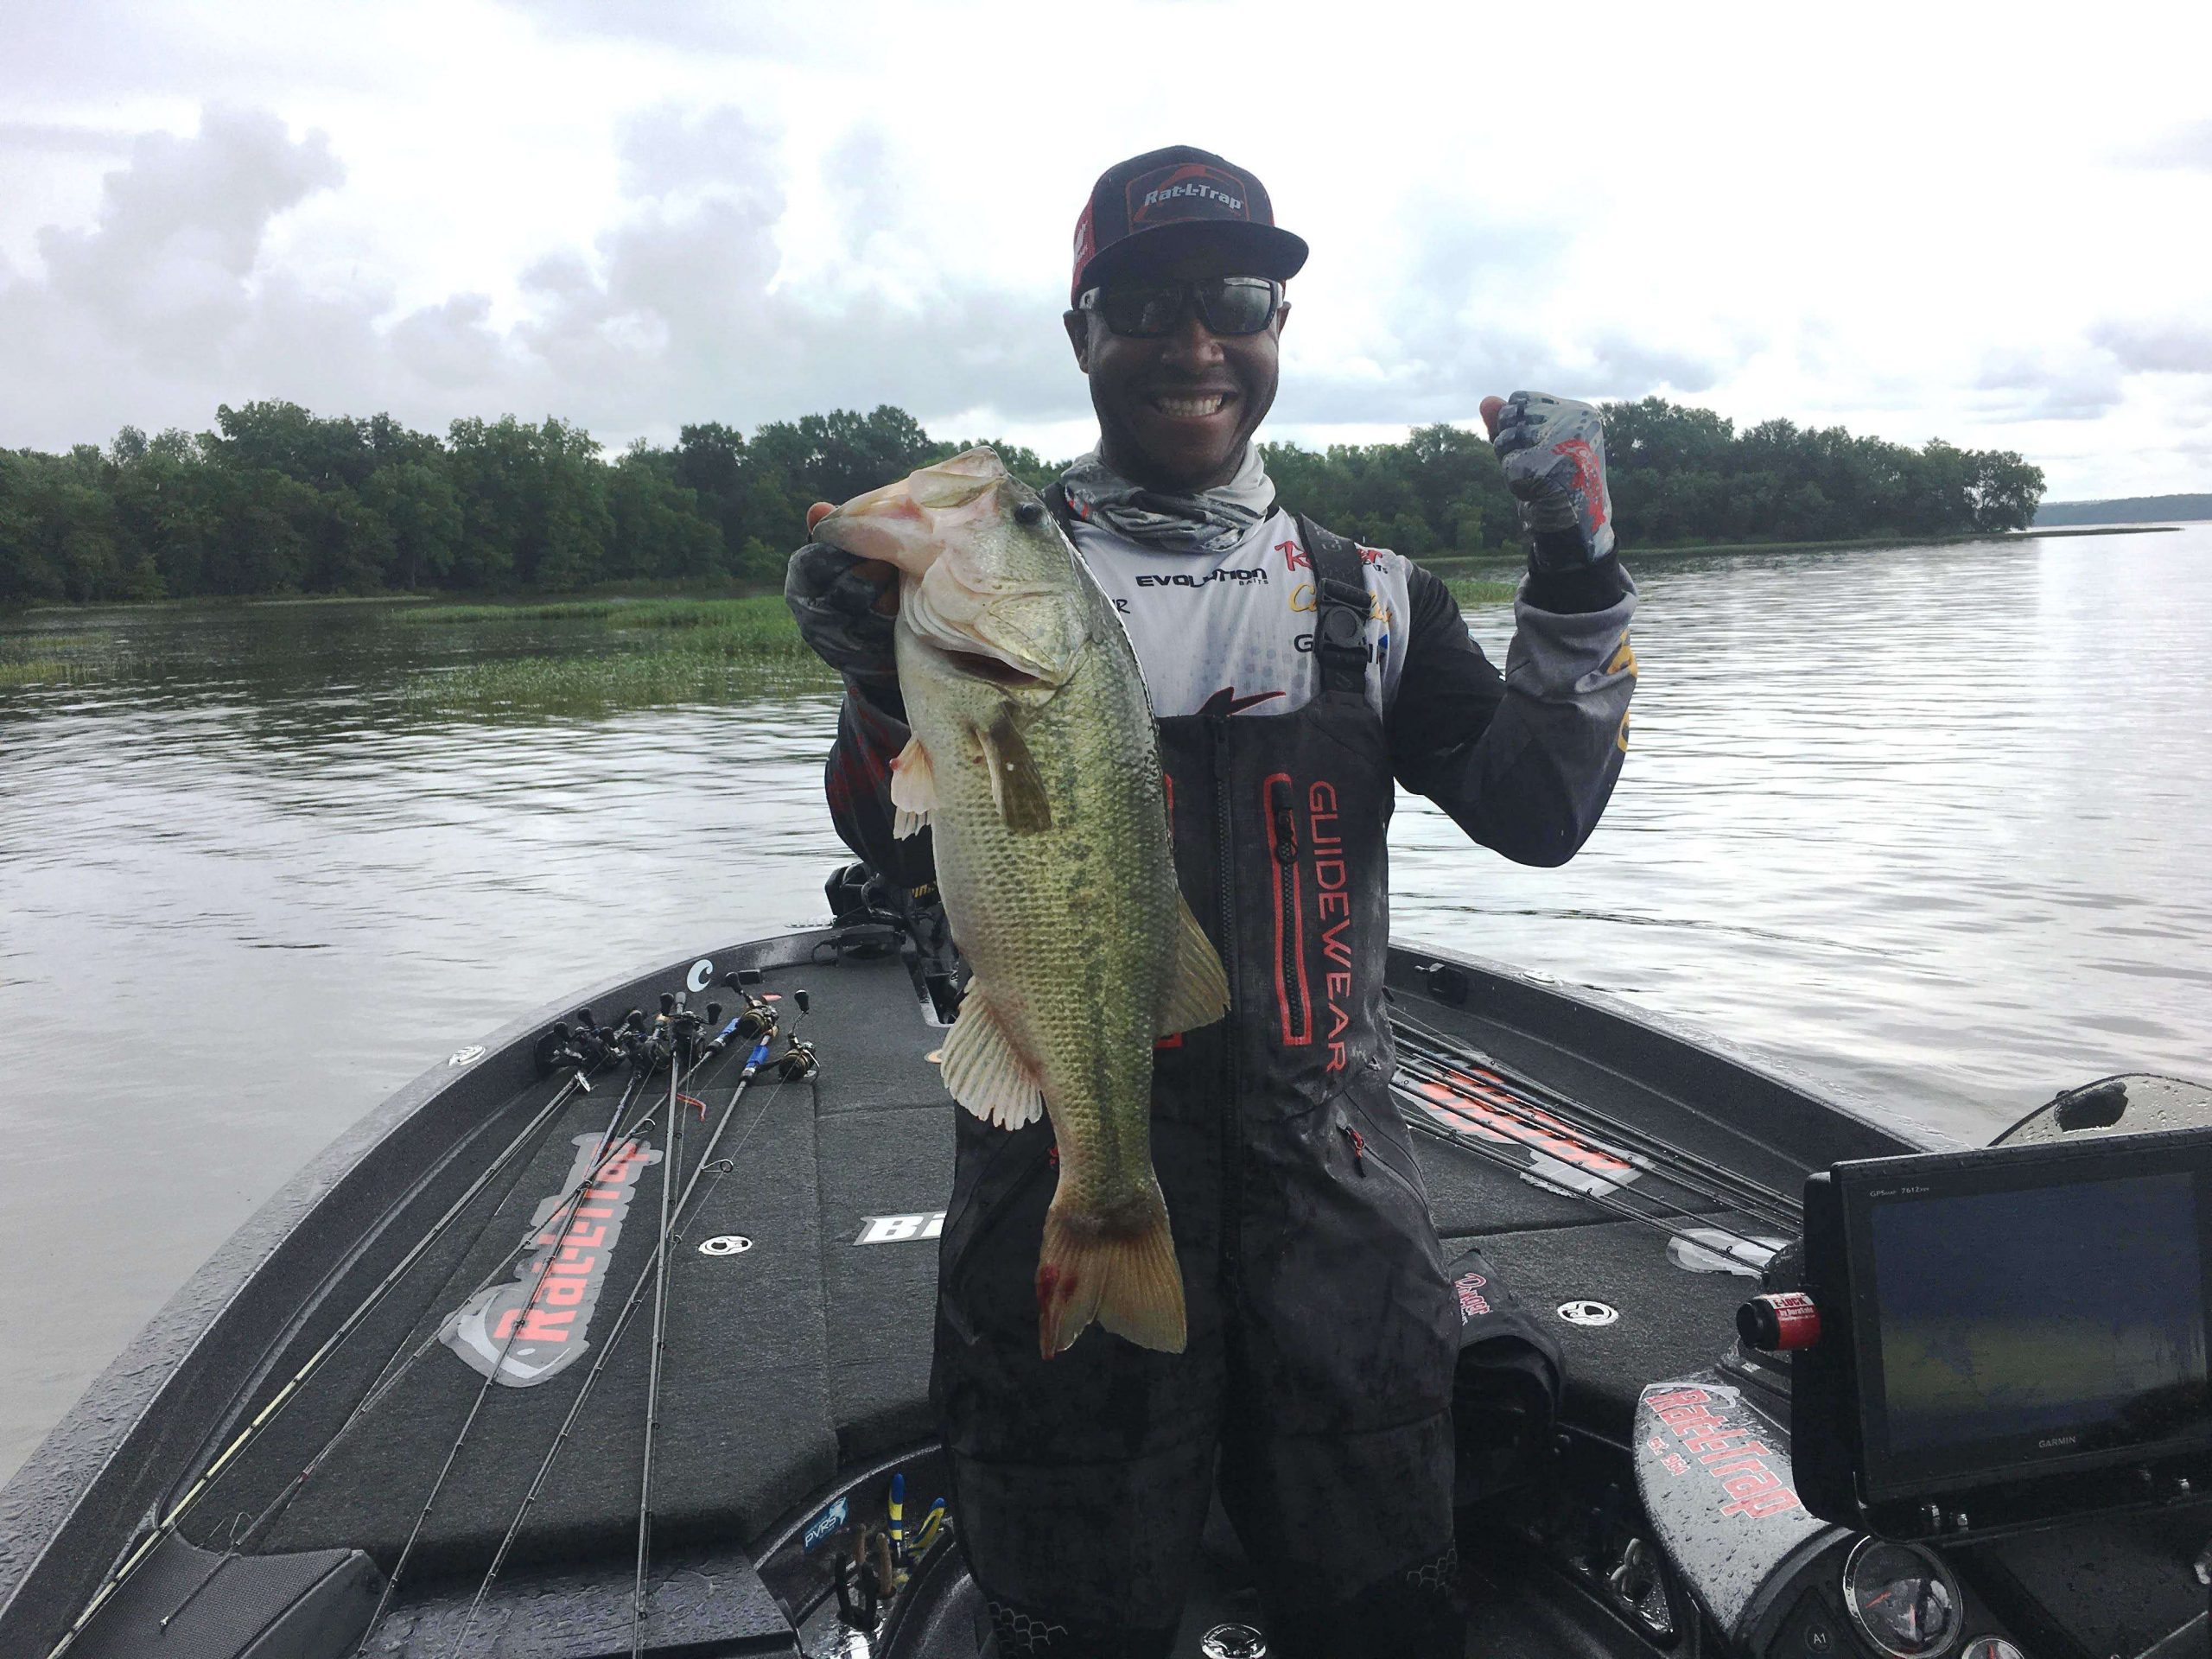 11th place: Mark Daniels Jr. (44-13) is on his way to his first Classic with no way to fall out going into the final day. But like those just before him, could work his way into a bigger paycheck and or more knowledge on catching smallmouth.